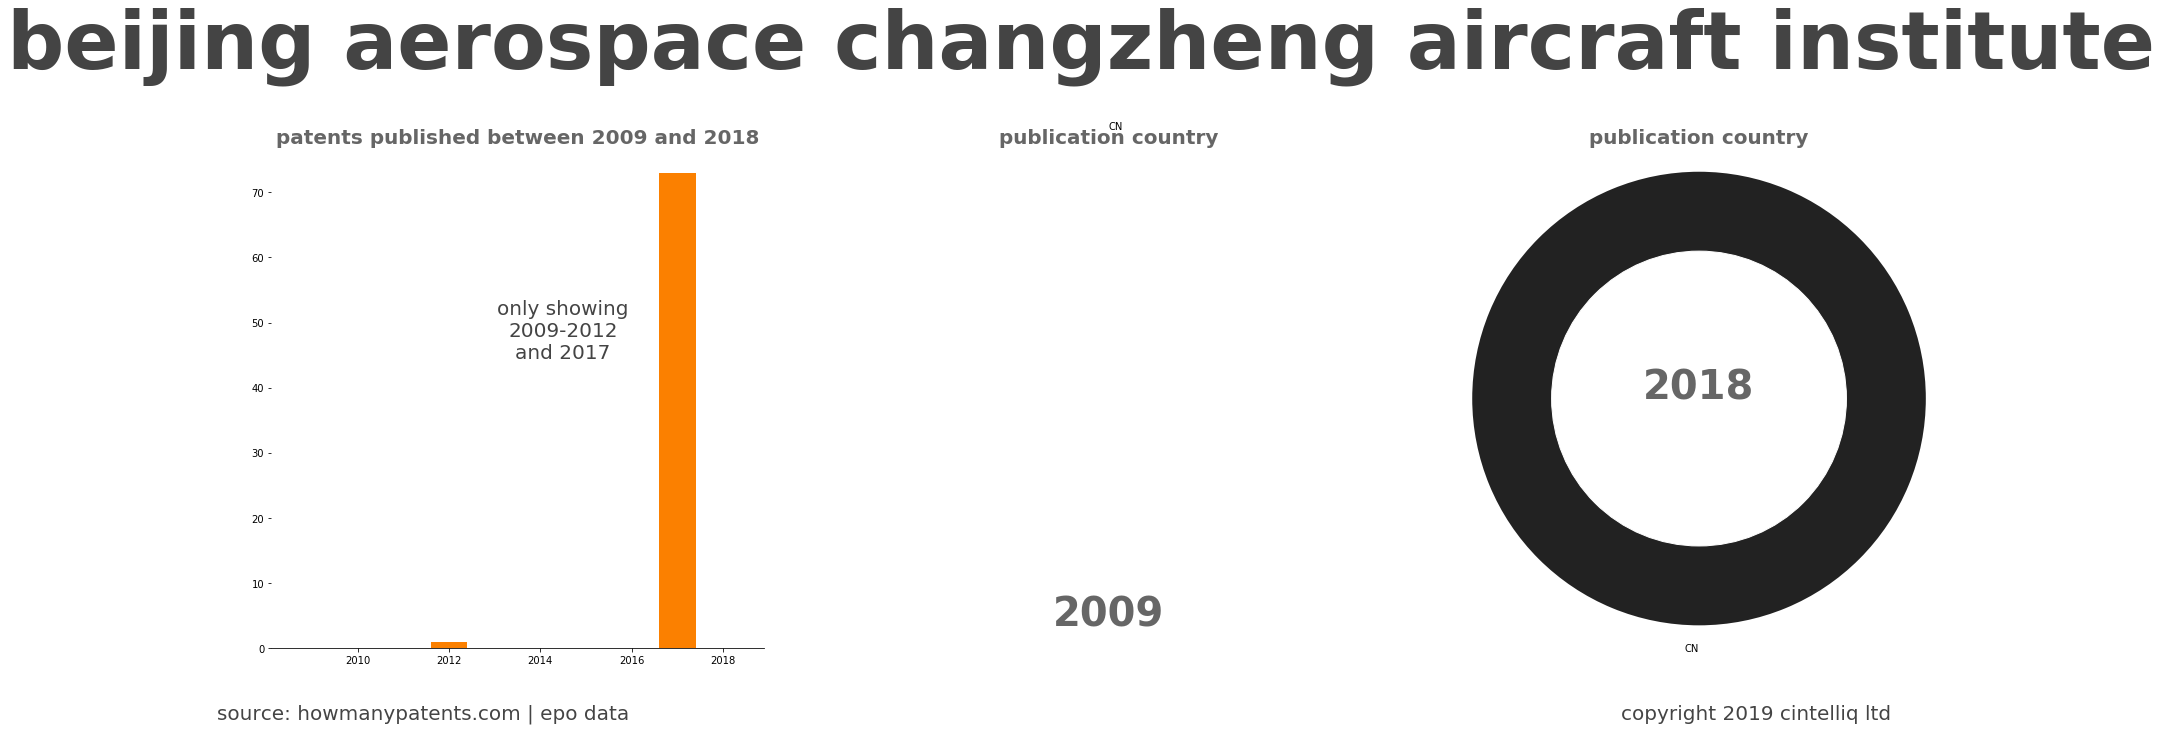 summary of patents for Beijing Aerospace Changzheng Aircraft Institute